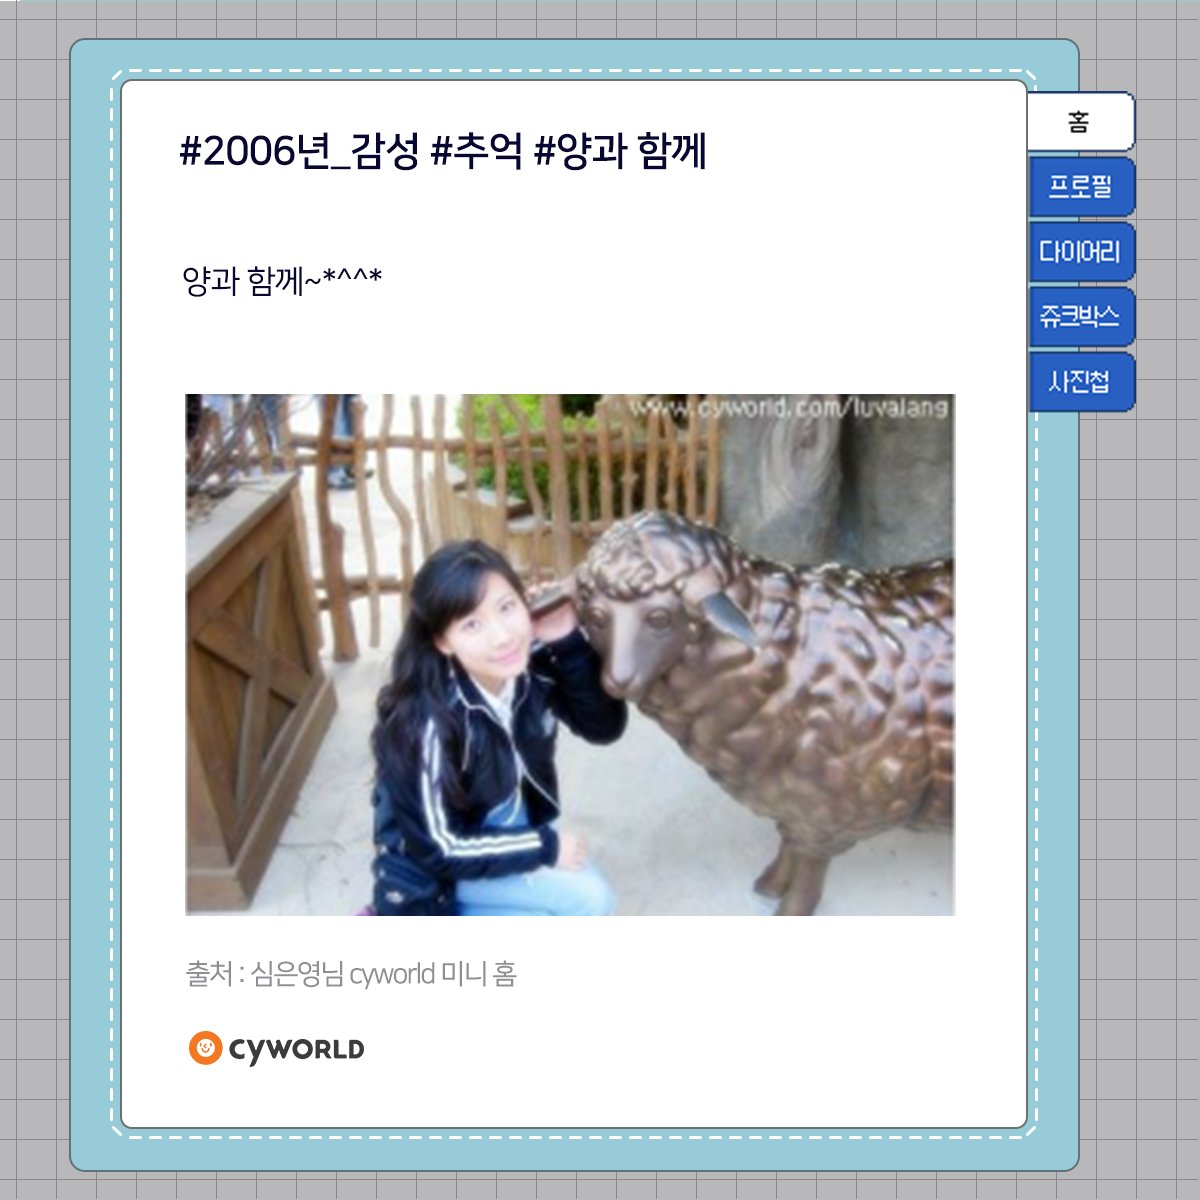 Corp_Cyworld tweet picture